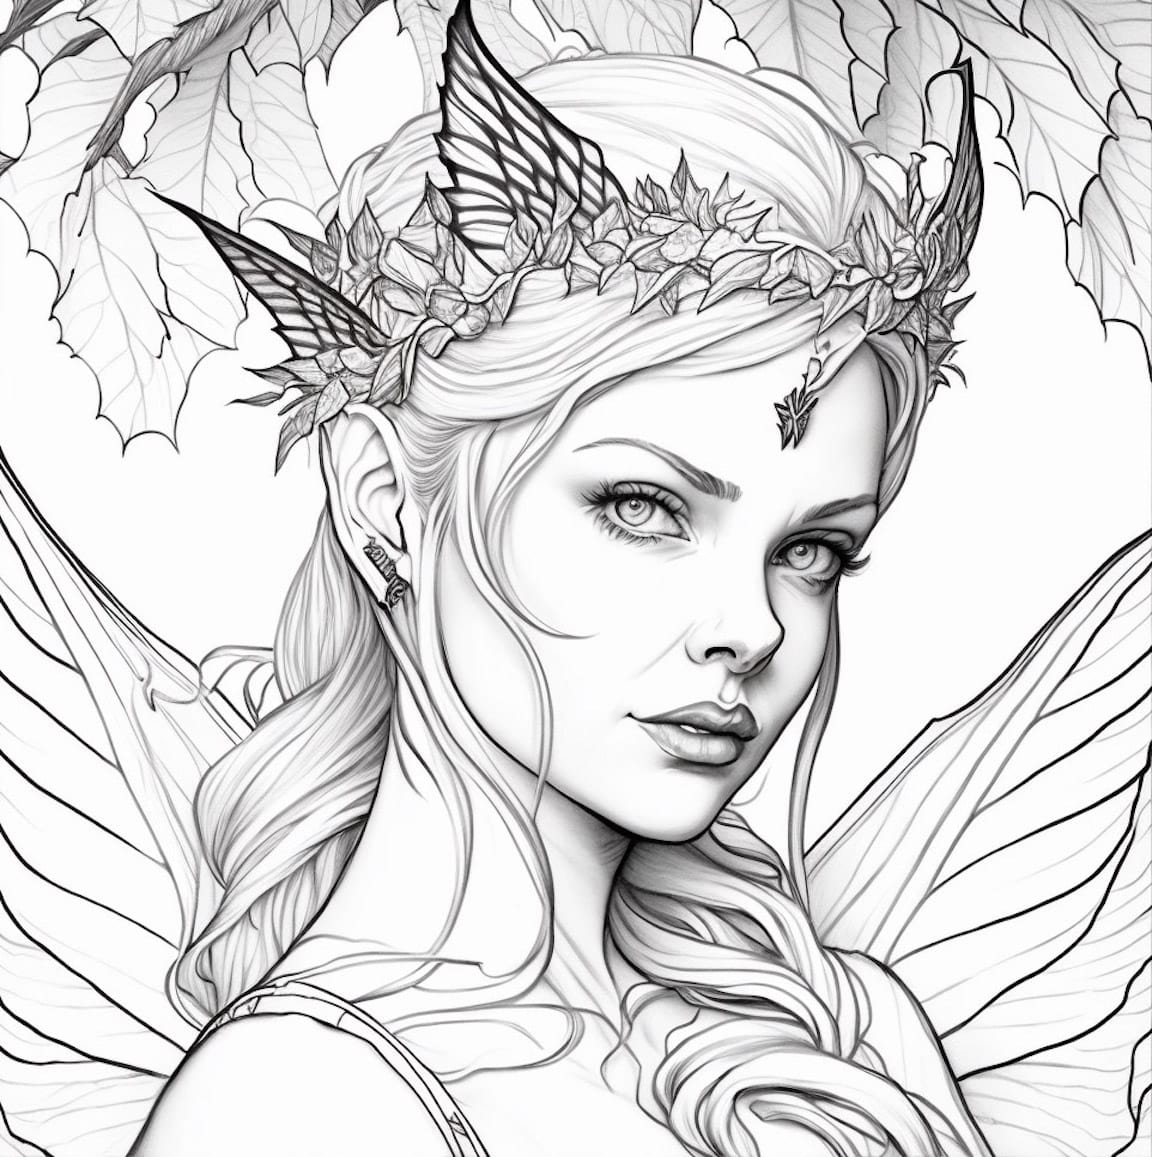 39 Fascinating Fairy Coloring Pages For Adults - Our Mindful Life